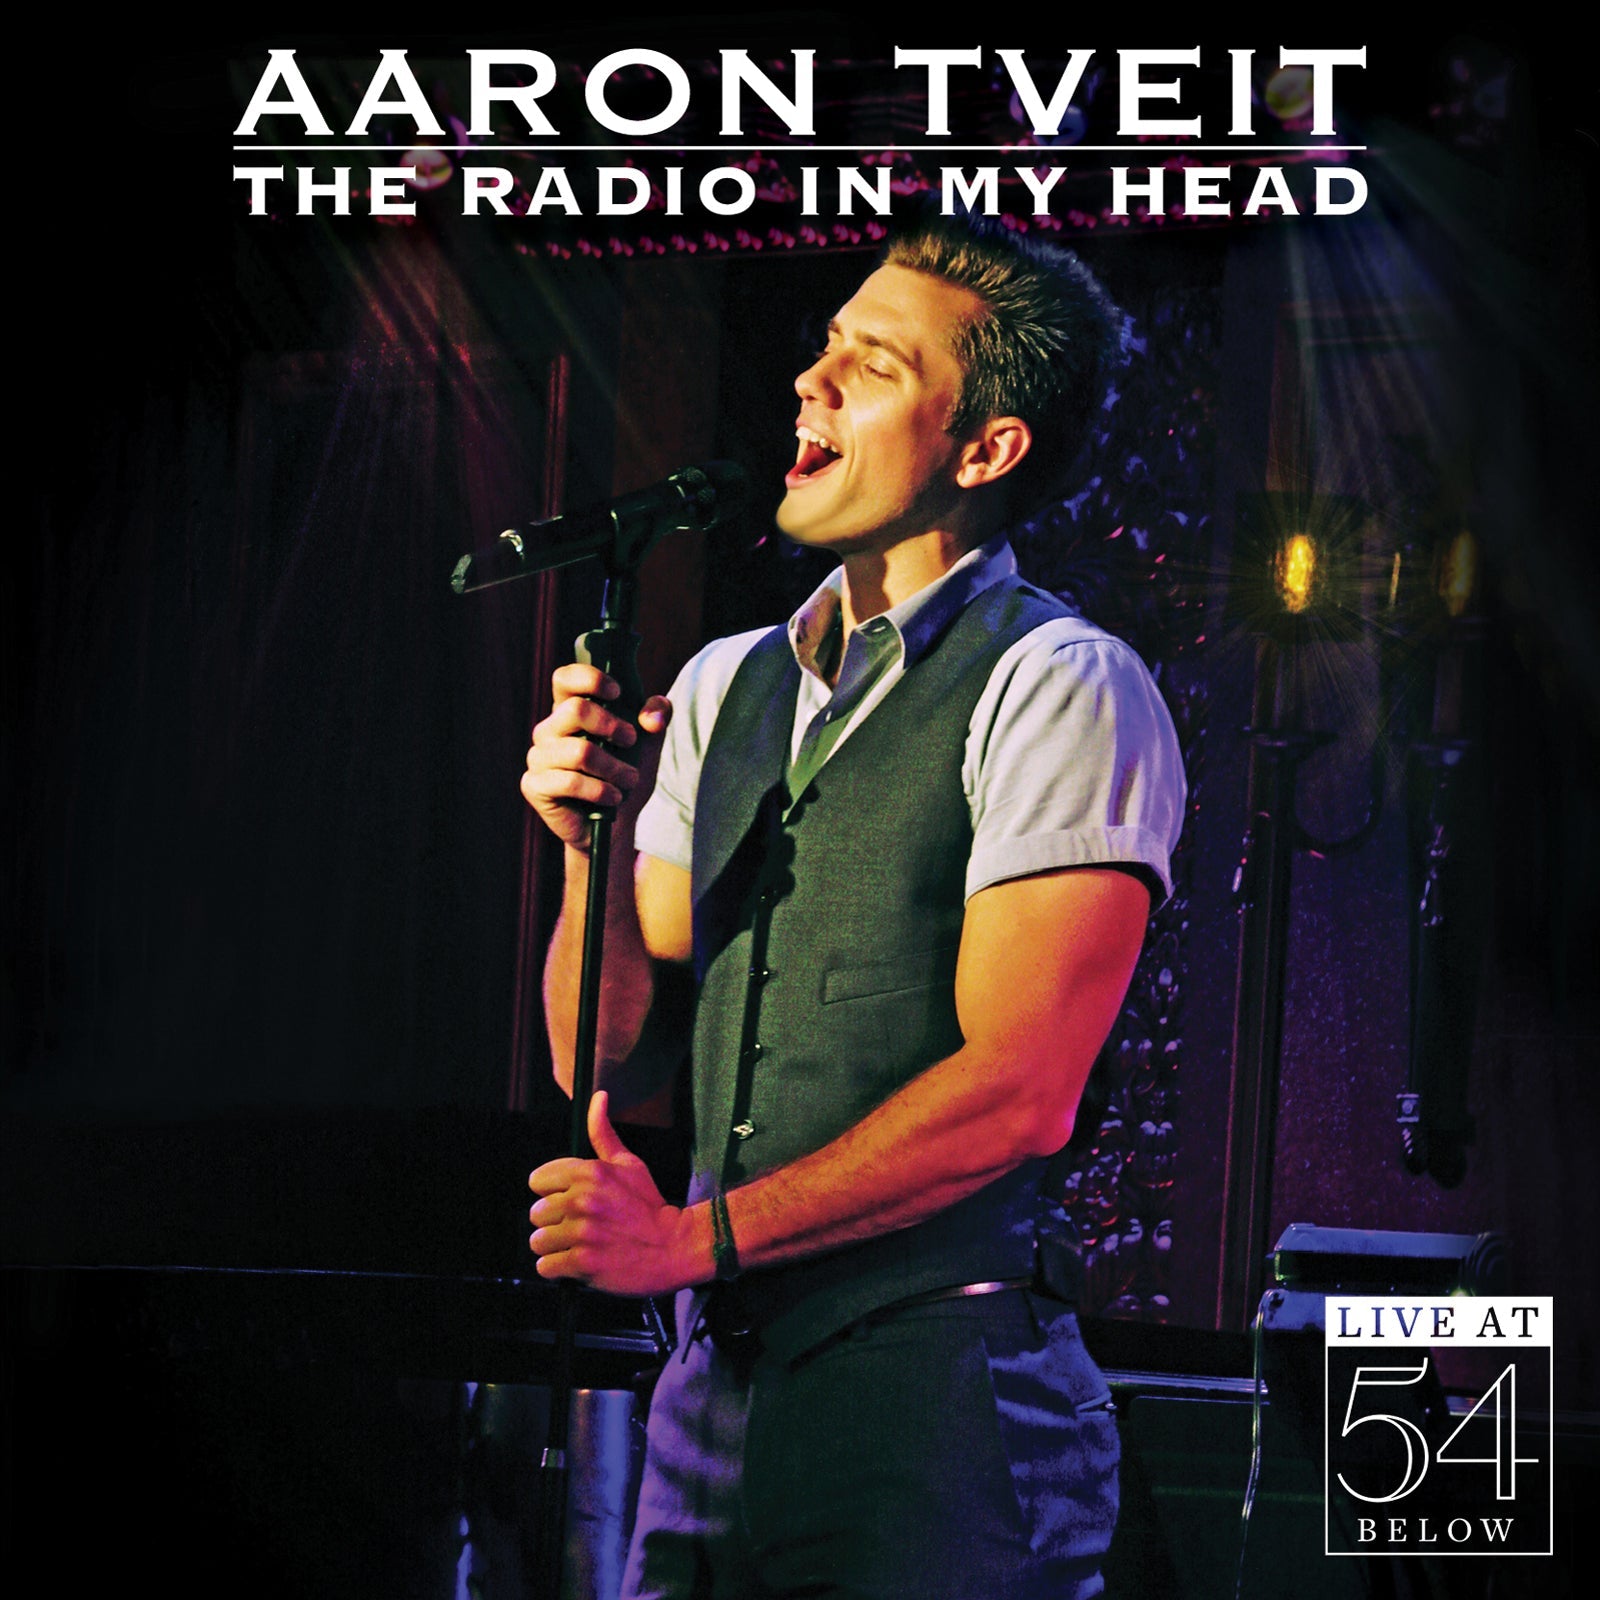 Aaron Tveit: The Radio In My Head - Live at 54 Below  [MP3]